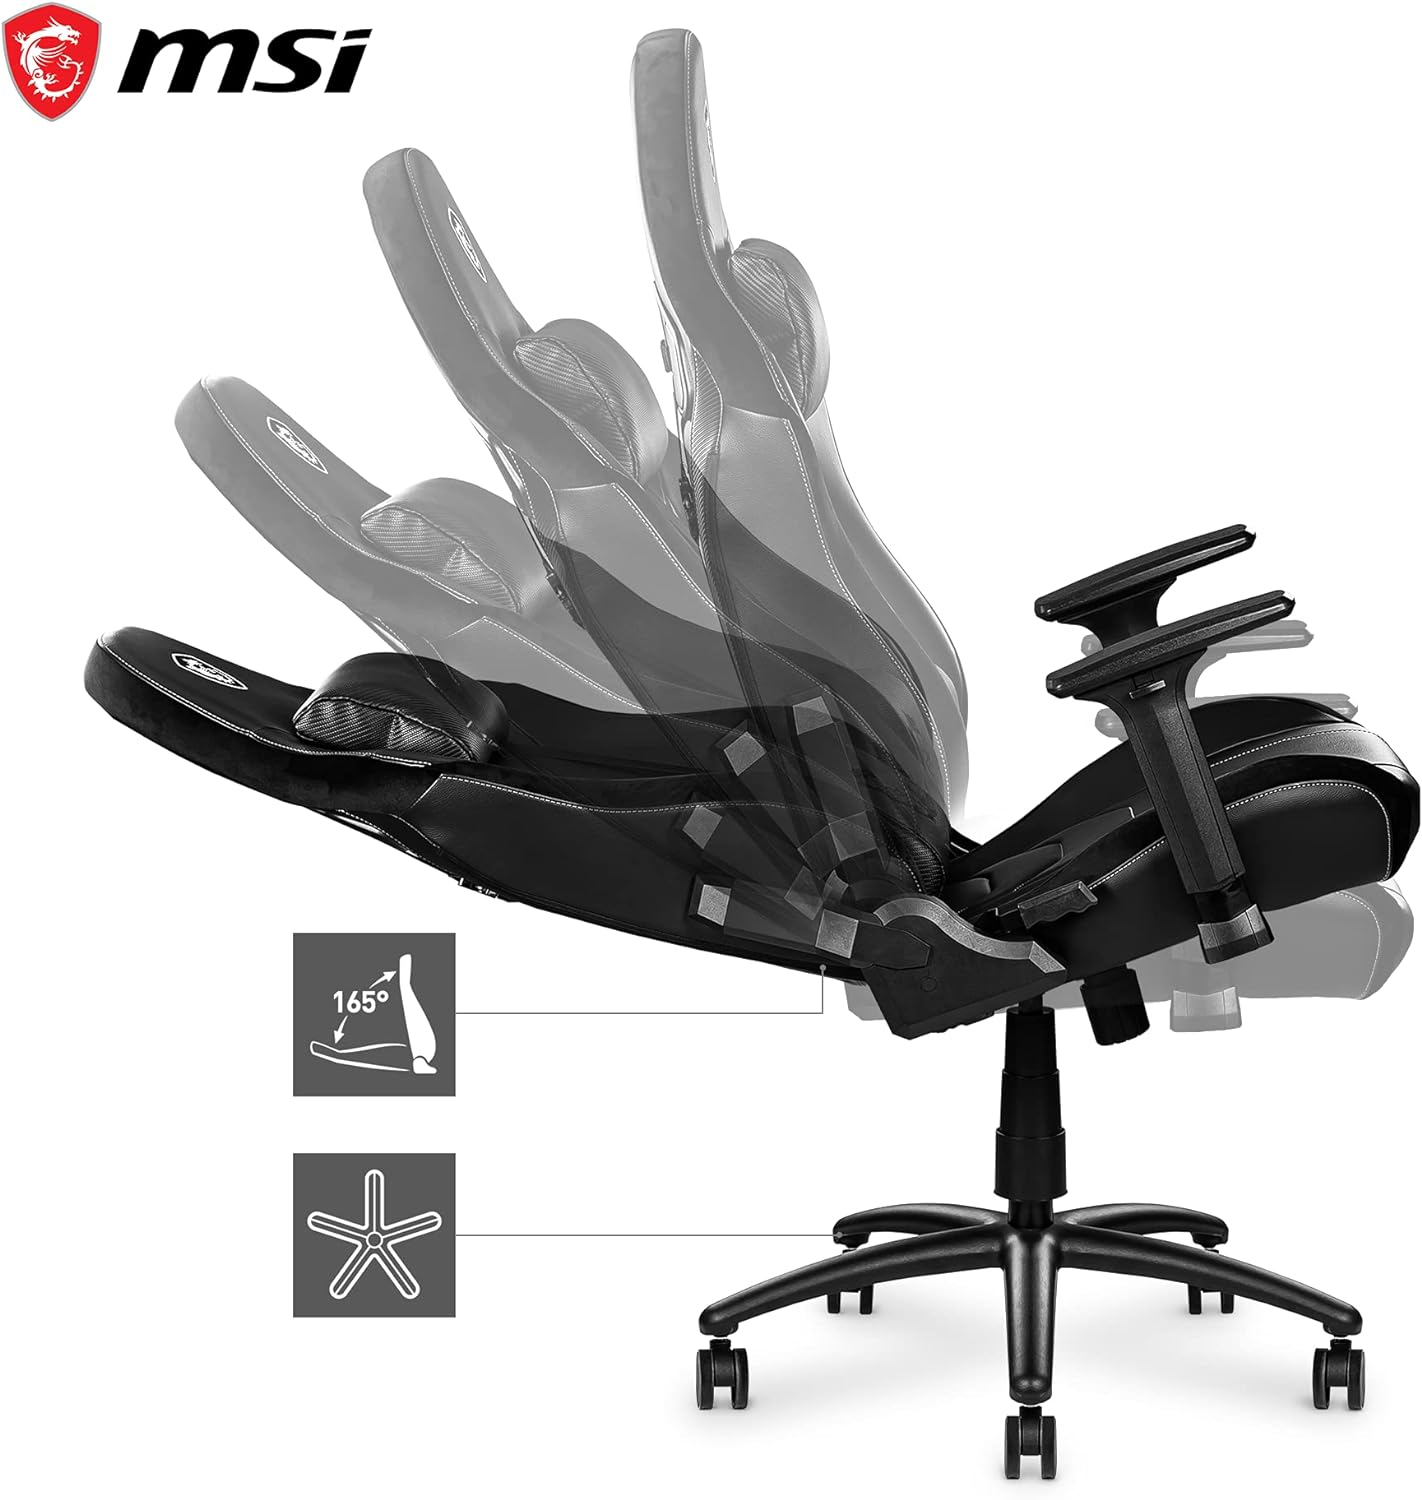 MSI MAG CH130 X Chair - Premium steel frame, class-4 gas lift piston, supports up to 150kg/330lbs, scratch-resistant caster wheels. 4719072795443